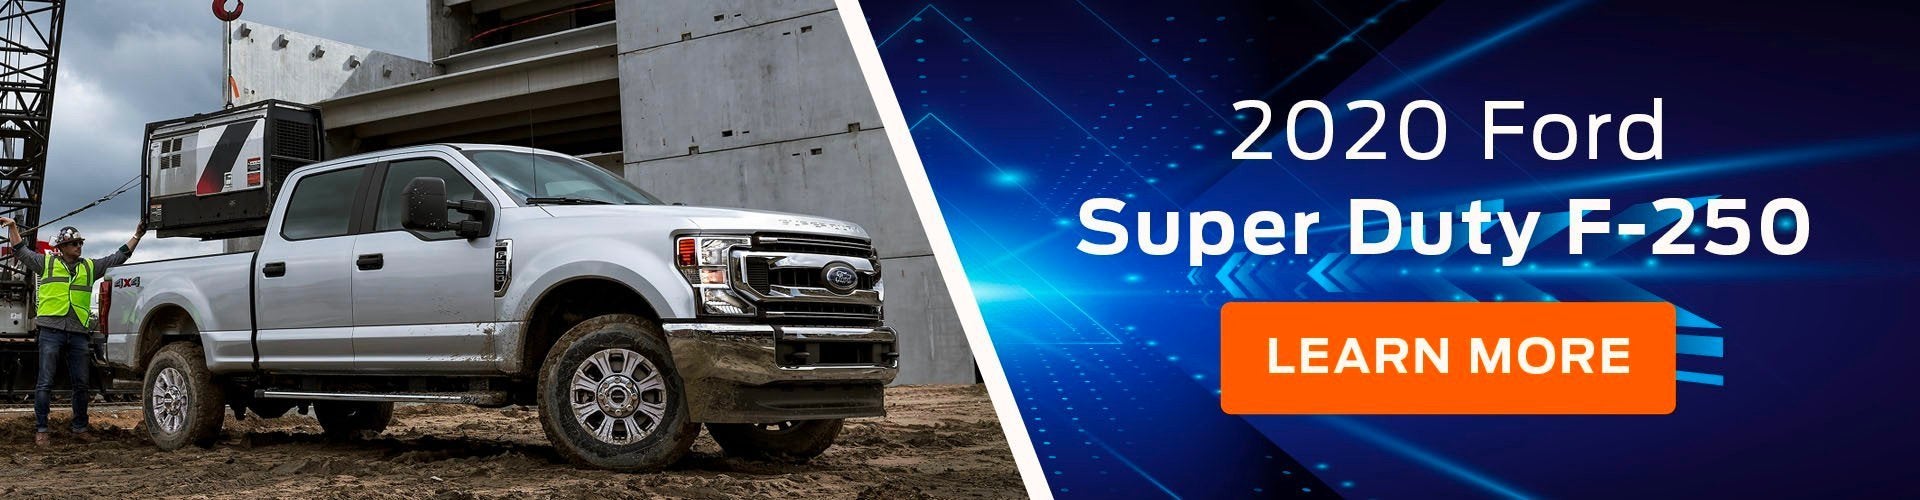 2020 Ford Super Duty F-250: Learn More